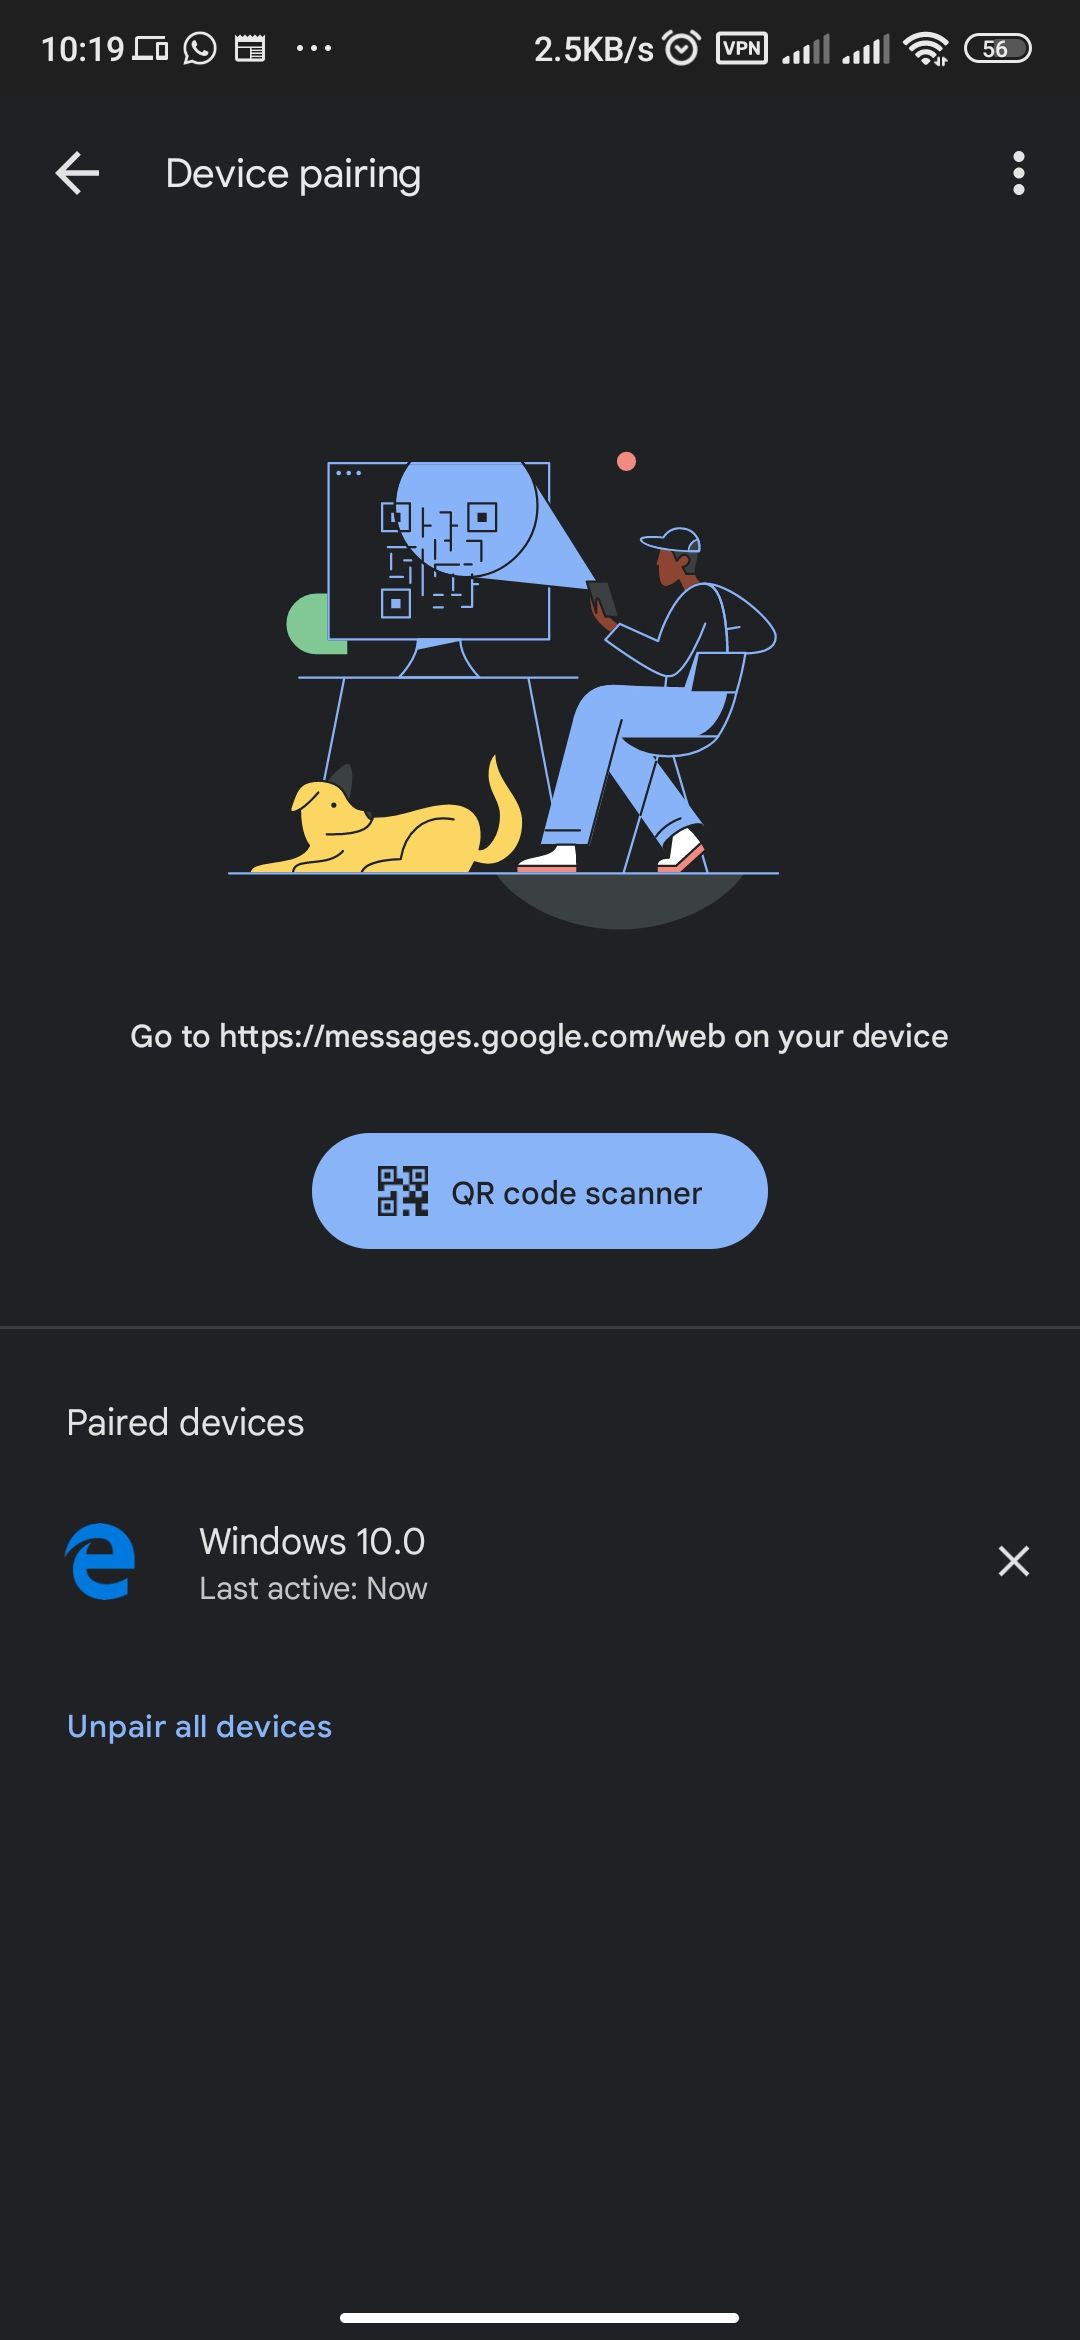 Device pairing section in Messages app